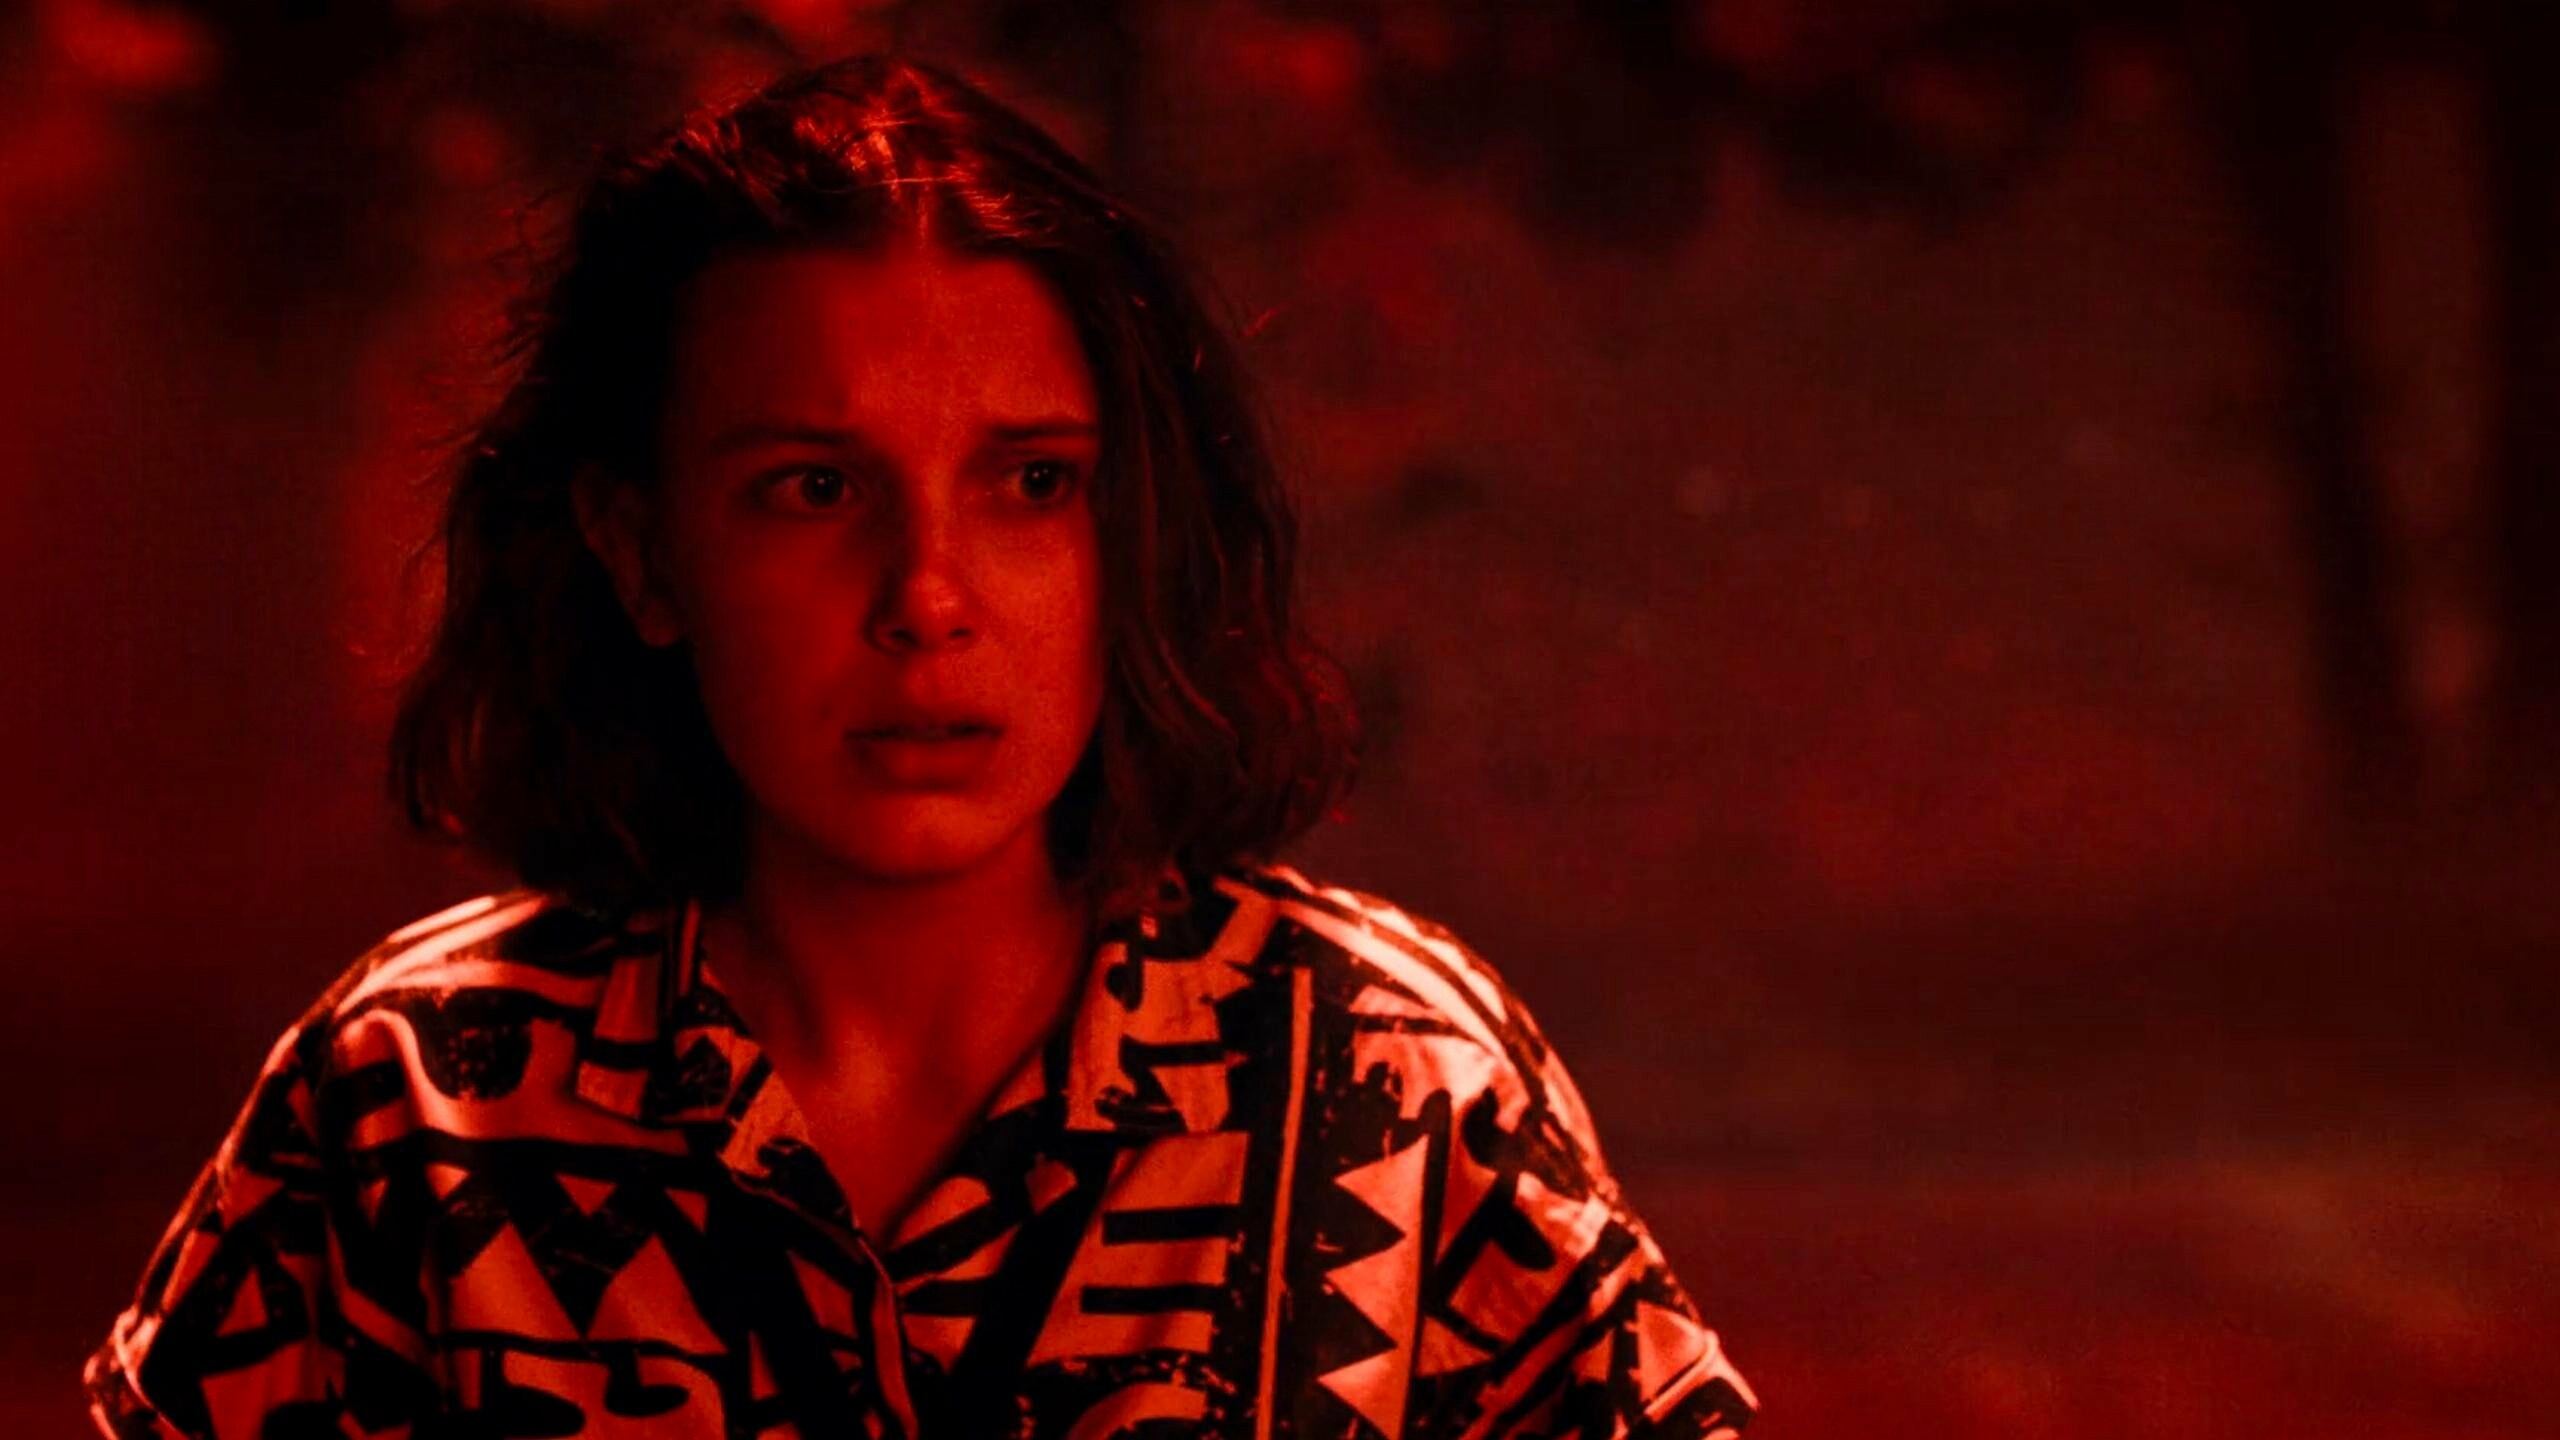 Stranger Things: Eleven, portrayed by British actress Millie Bobby Brown. 2560x1440 HD Wallpaper.